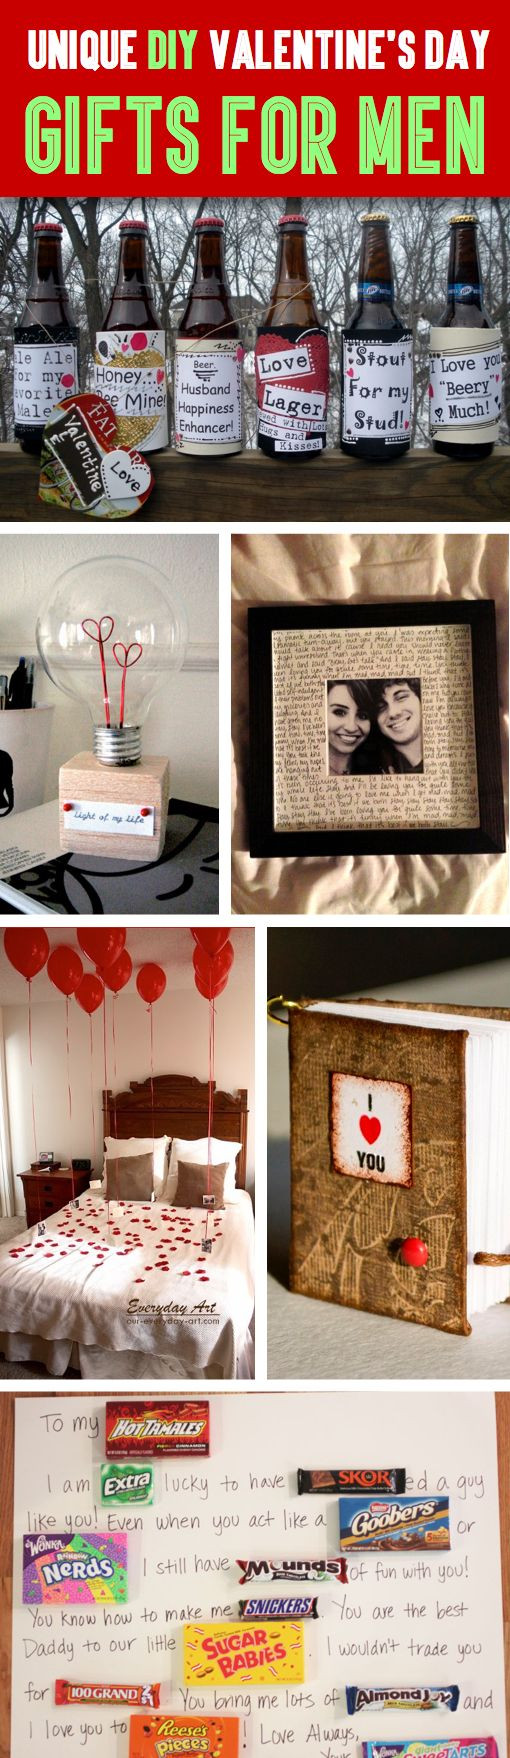 Cheap Valentines Gift Ideas For Guys
 35 Unique DIY Valentine’s Day Gifts For Men